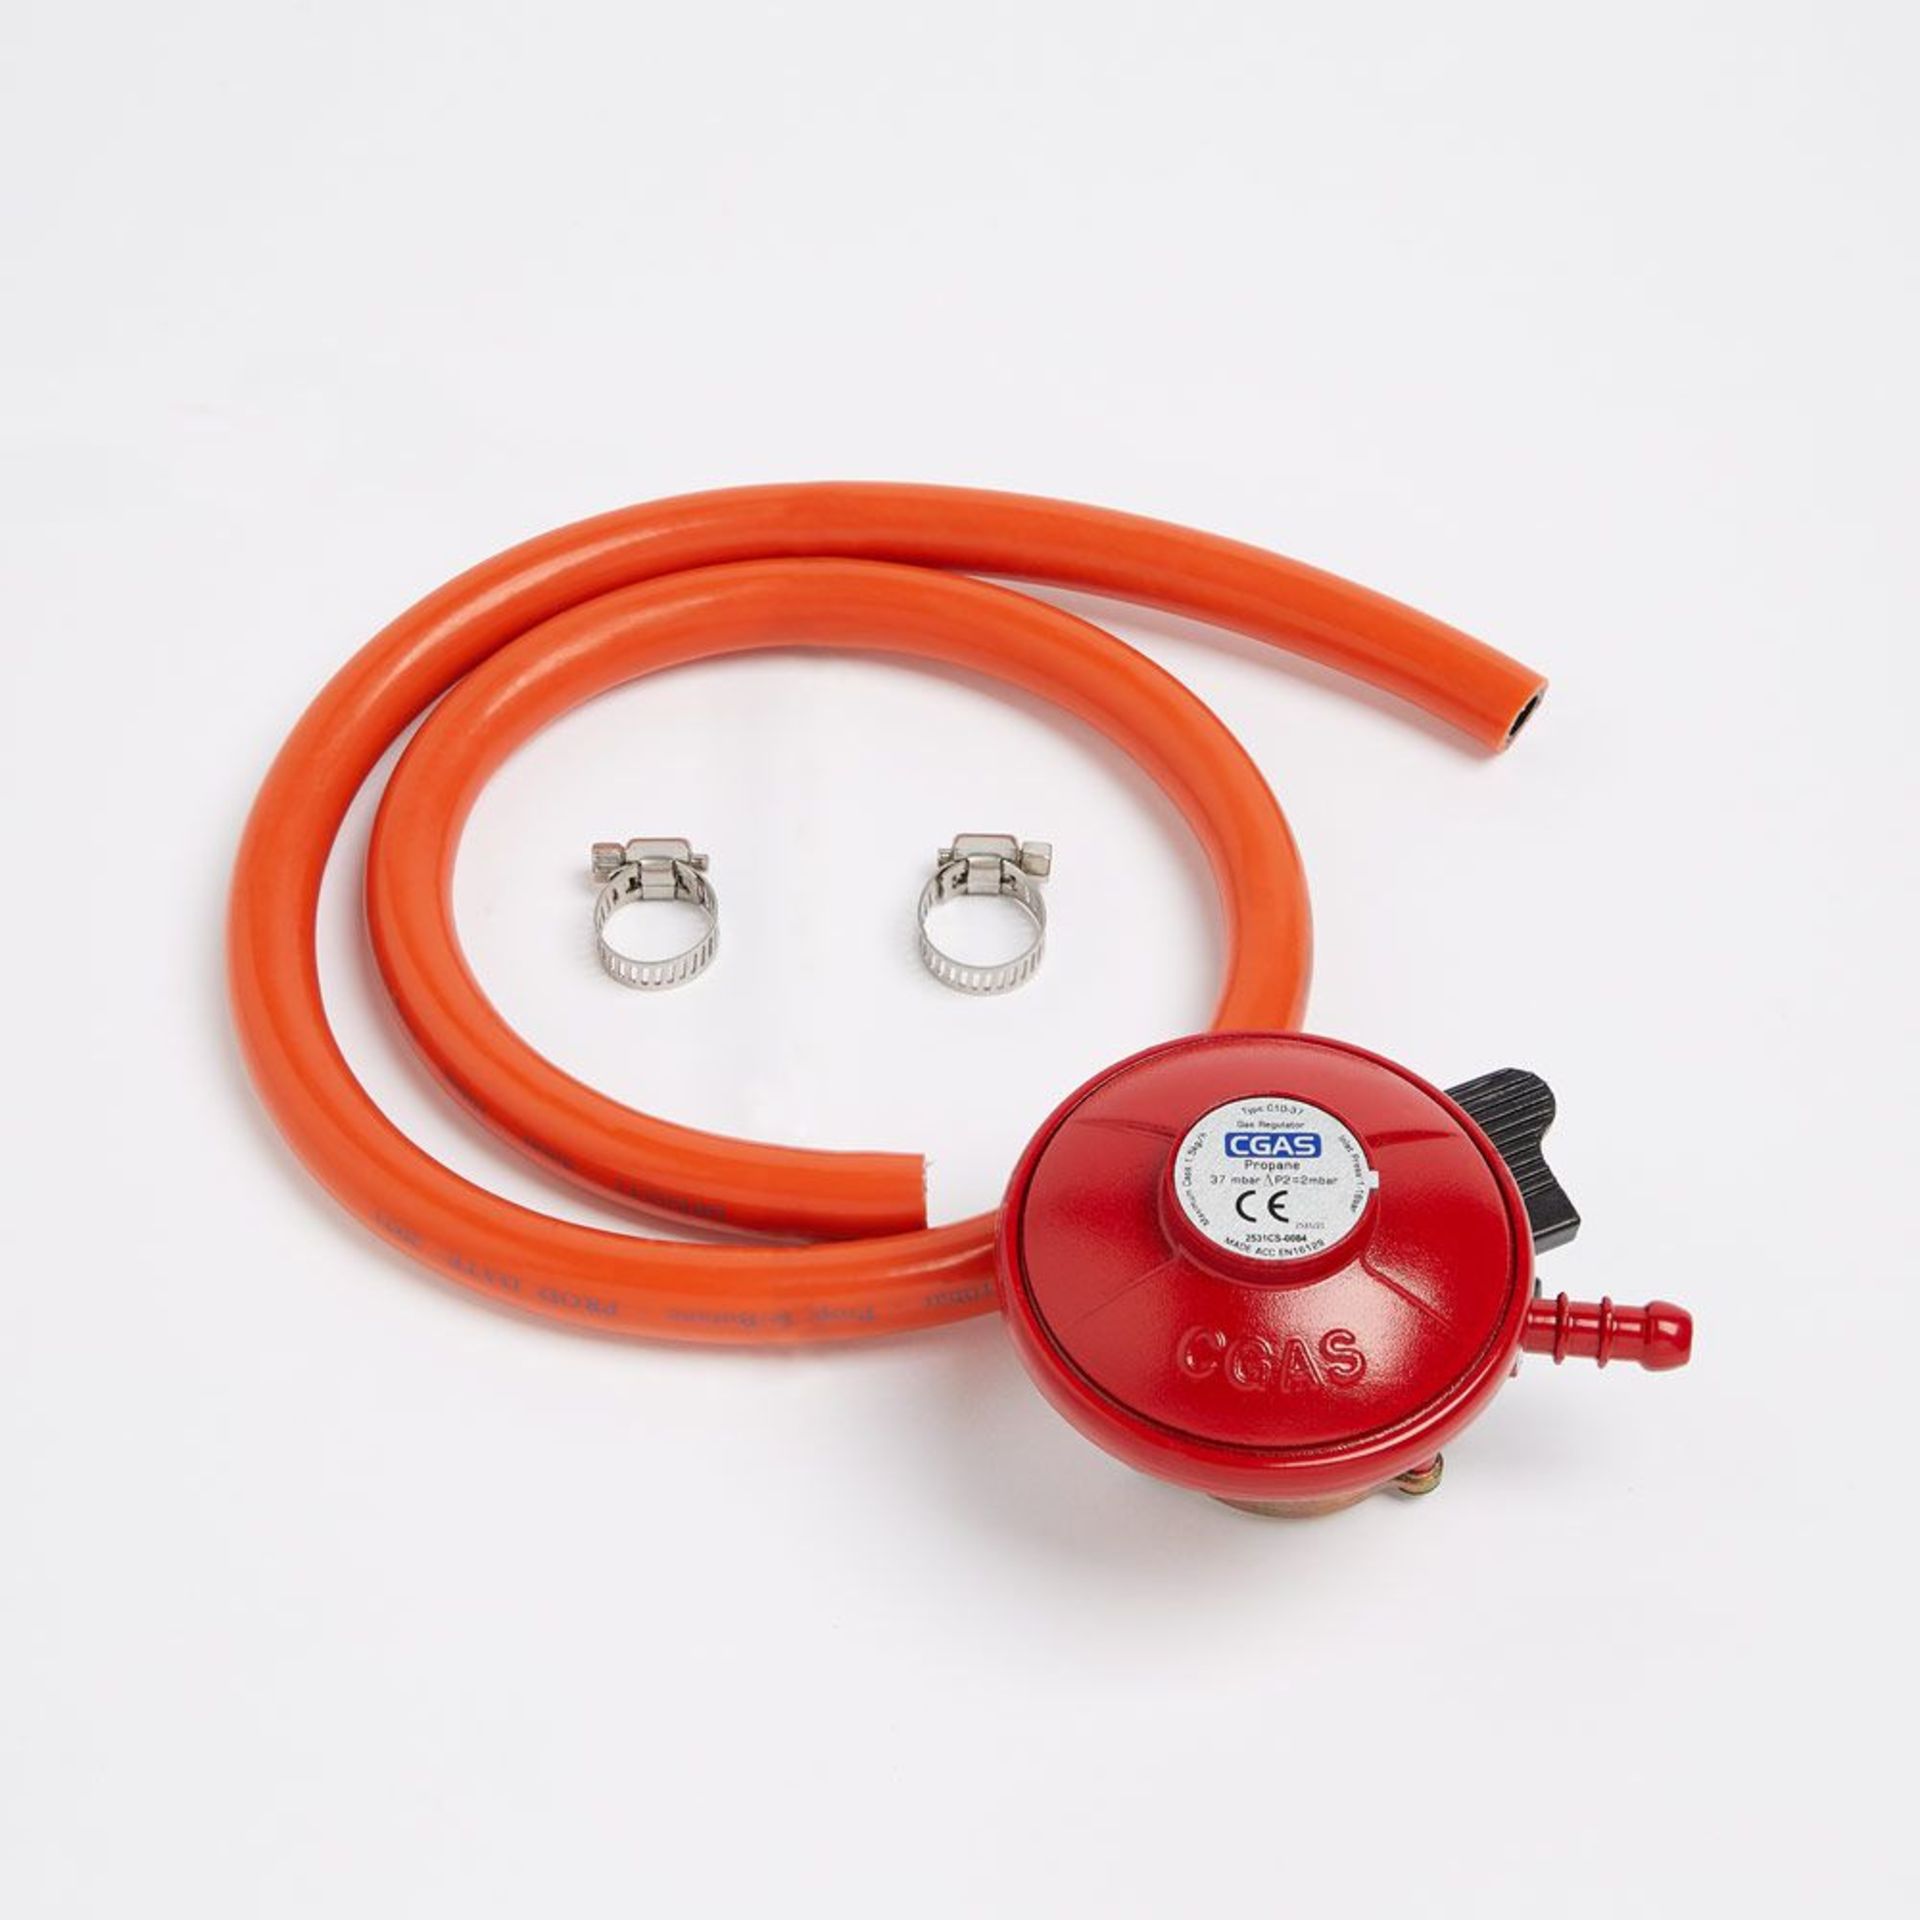 27mm quick connect Propane Regulator. - BI. Made of zinc alloy and PVC for extra durability, level